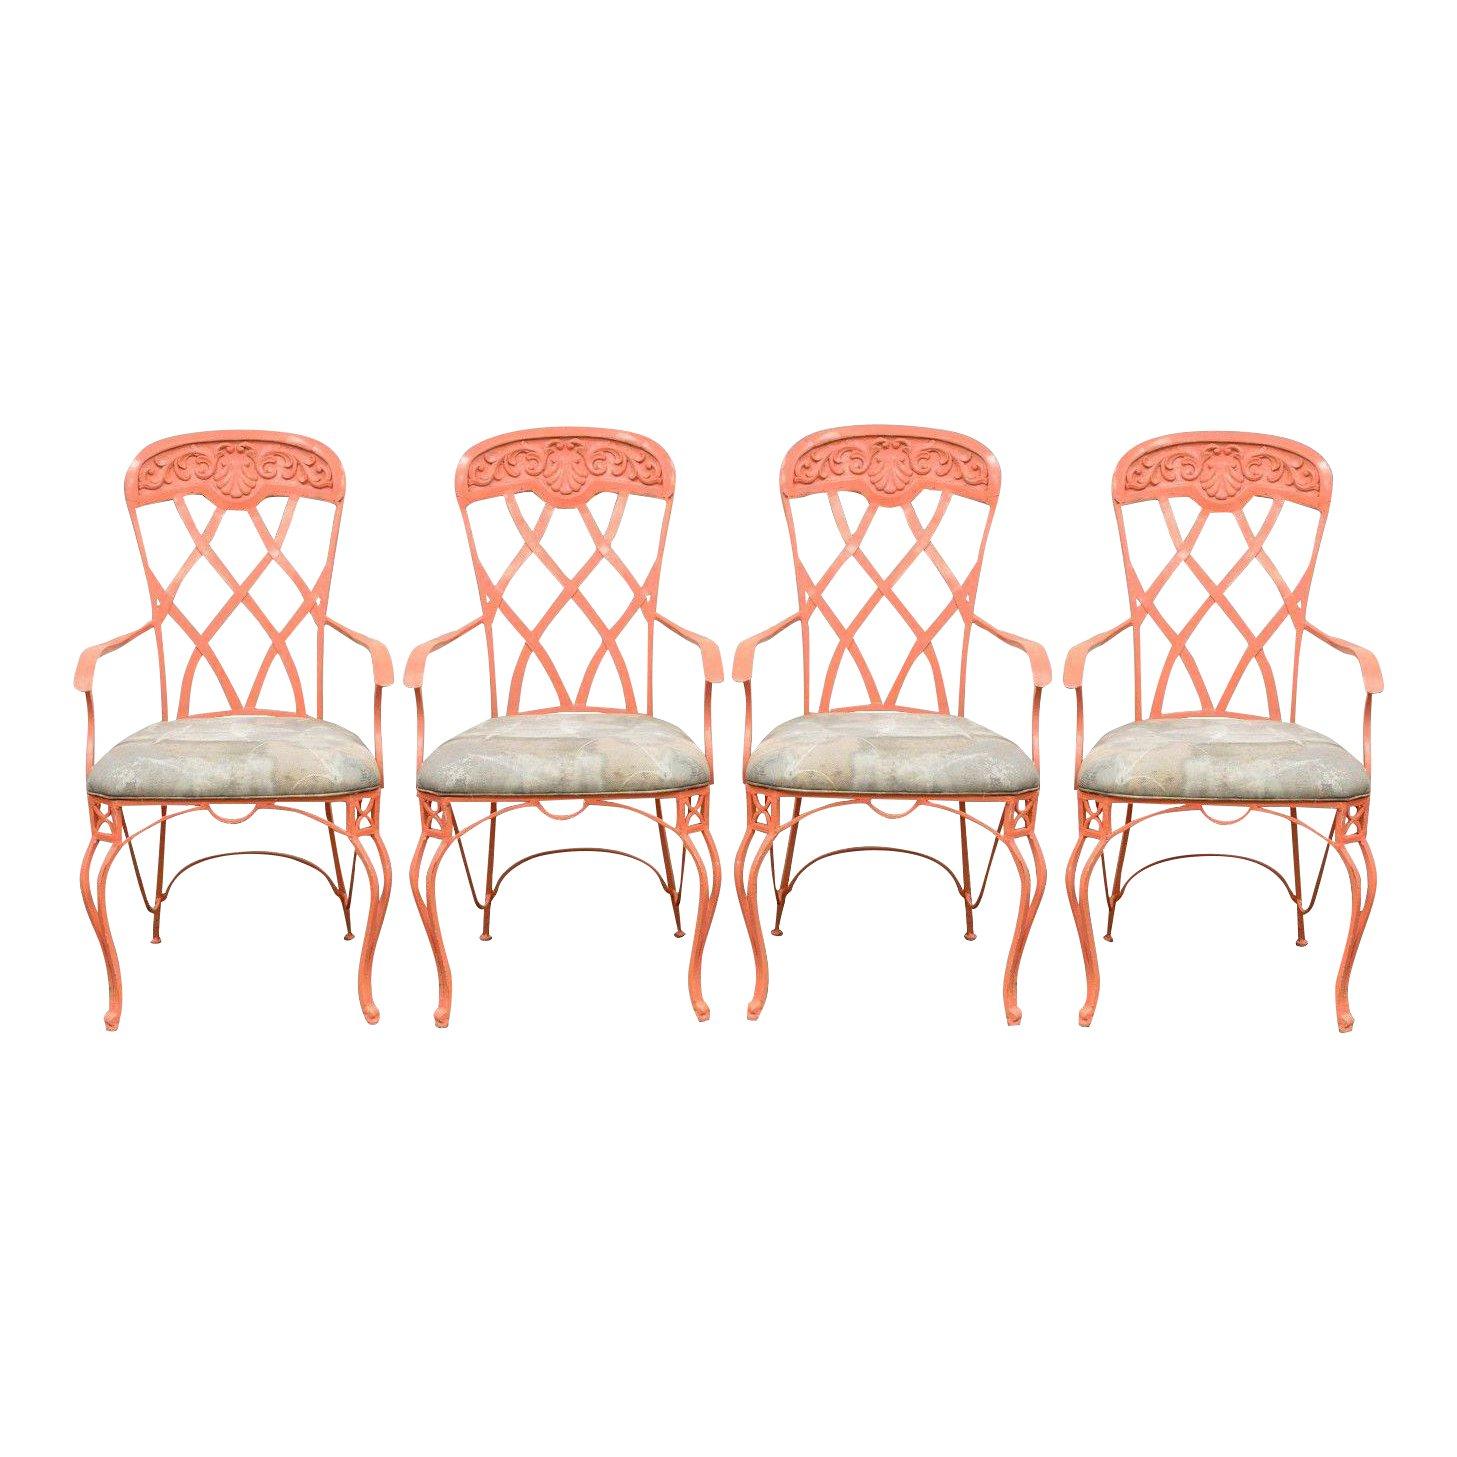 Set of Four French Regency Style Wrought Iron Patio Sunroom Dining Armchairs